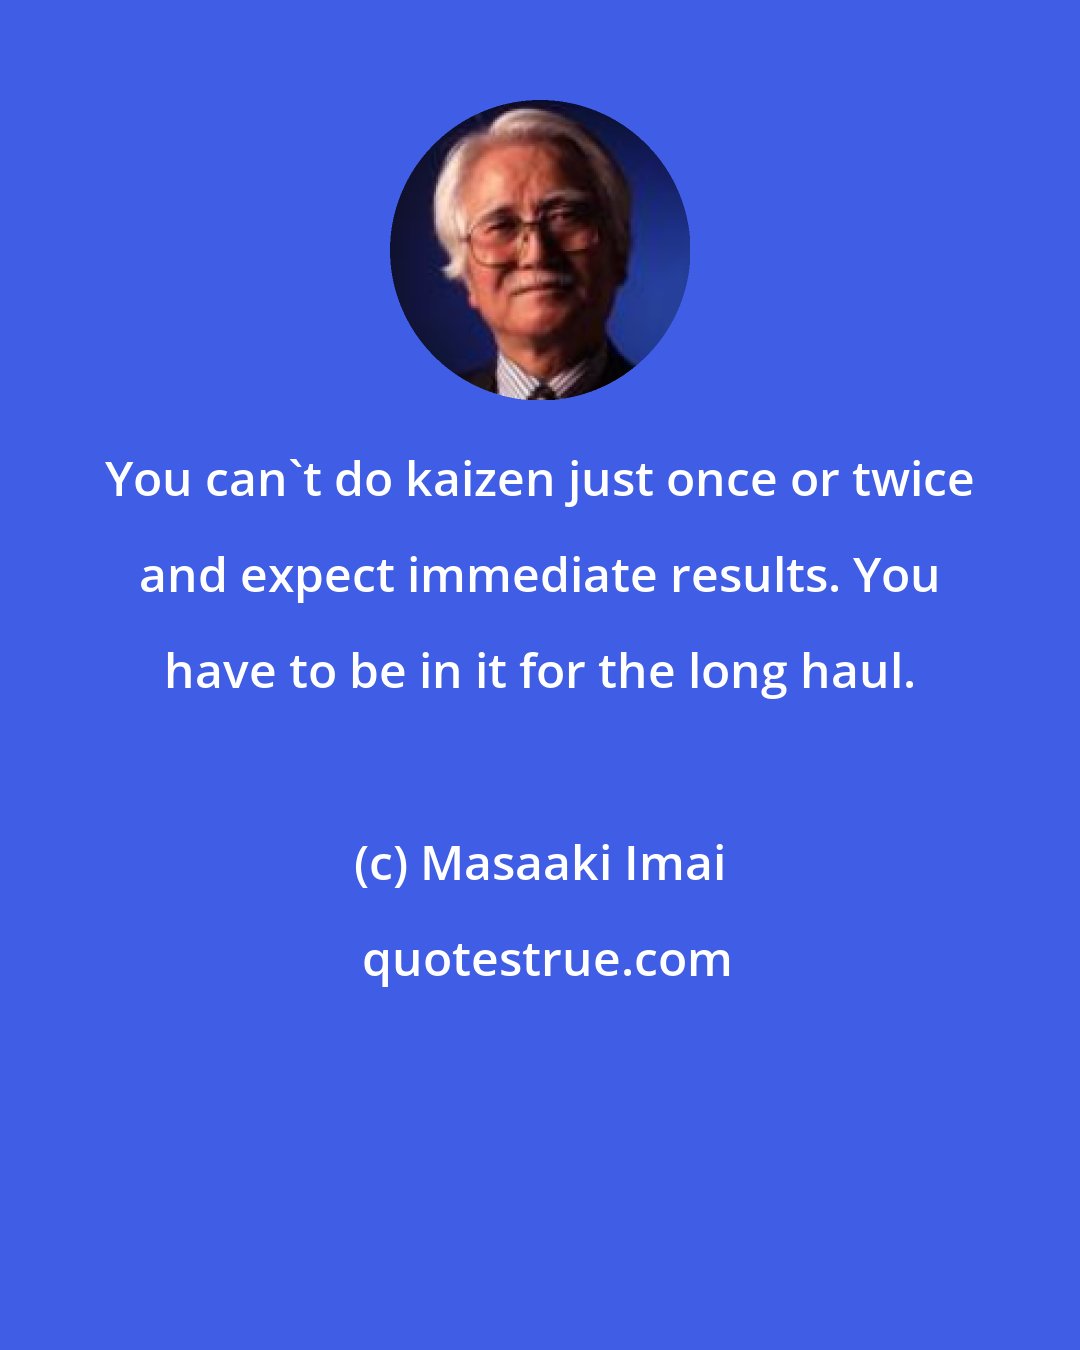 Masaaki Imai: You can't do kaizen just once or twice and expect immediate results. You have to be in it for the long haul.